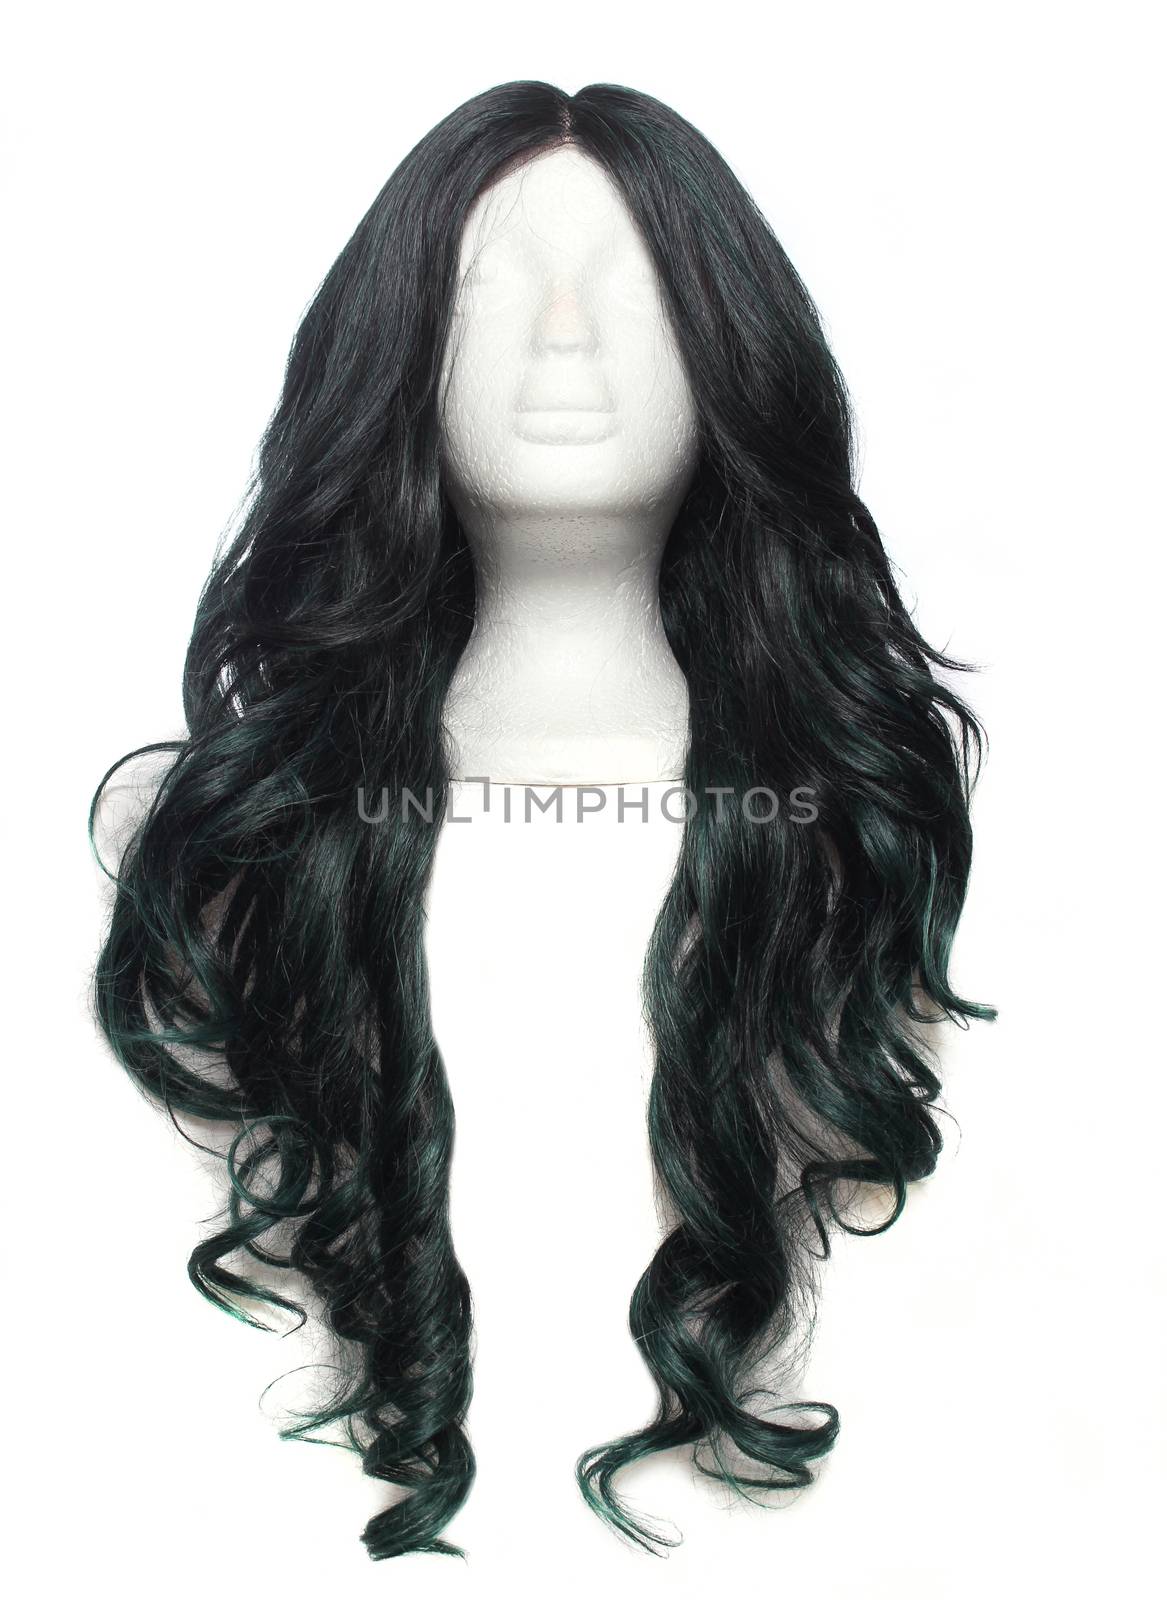 Black With Green Wig on Mannequin head with white by Marti157900